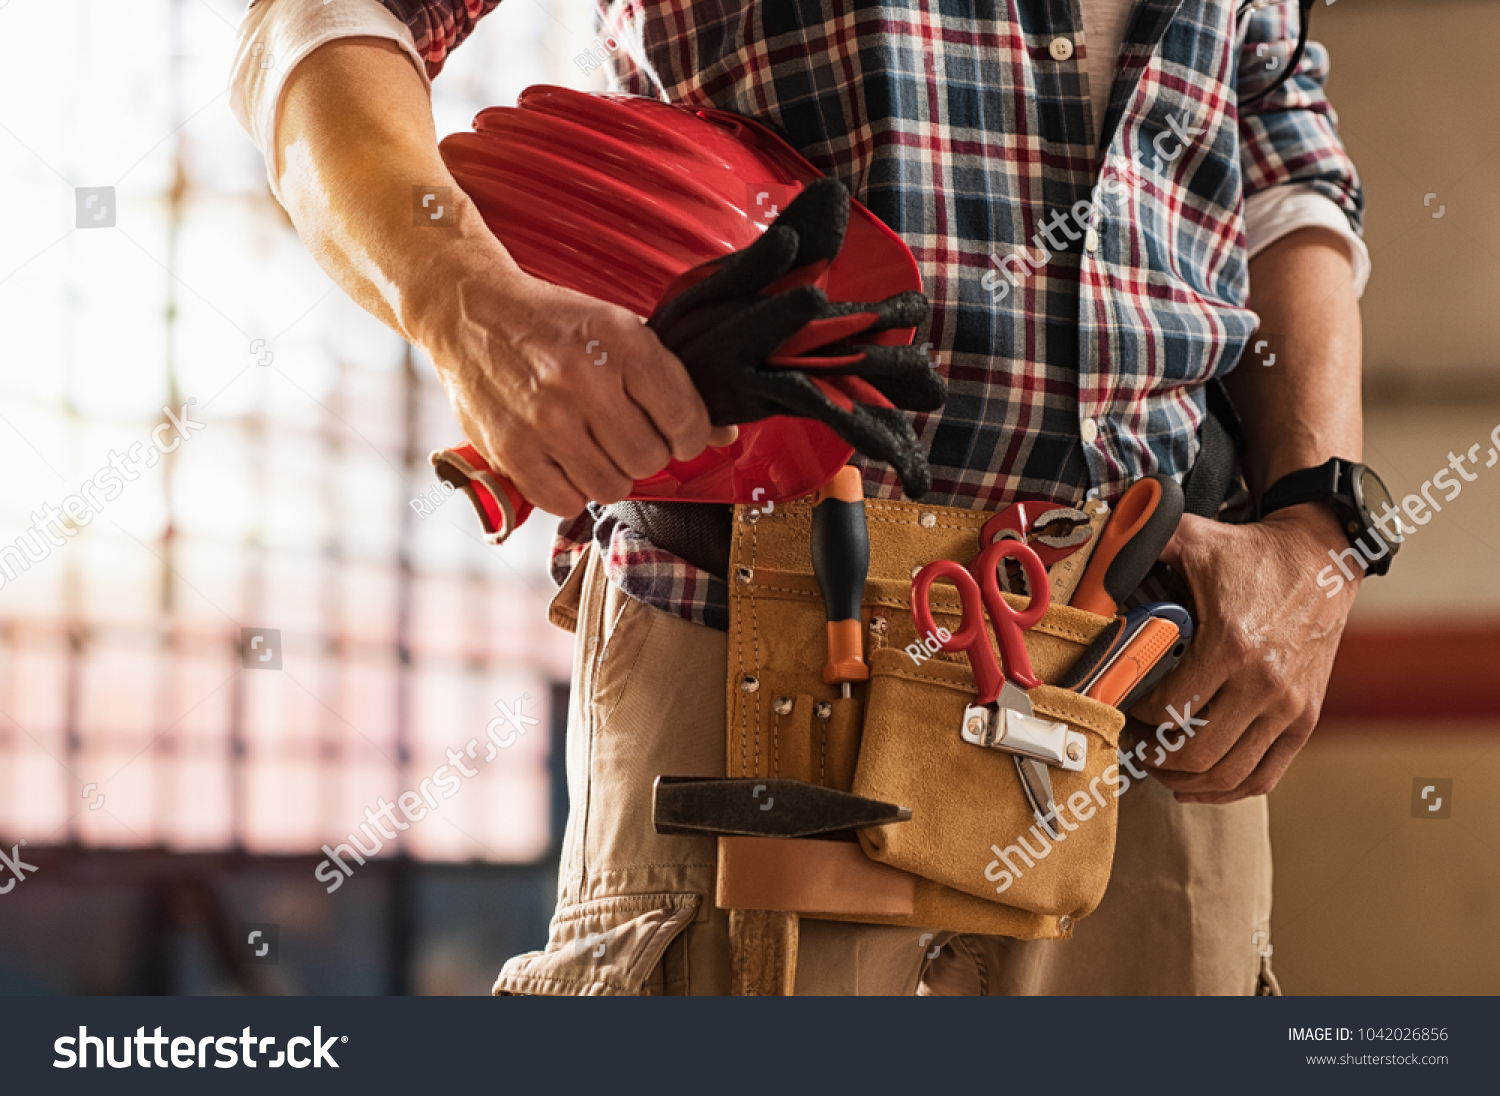 Closeup of bricklayer hands holding hardhat and construction equipment. Detail of mason man hands holding work gloves and wearing tool kit on waist. Handyman with tools belt and artisan equipment. #1042026856